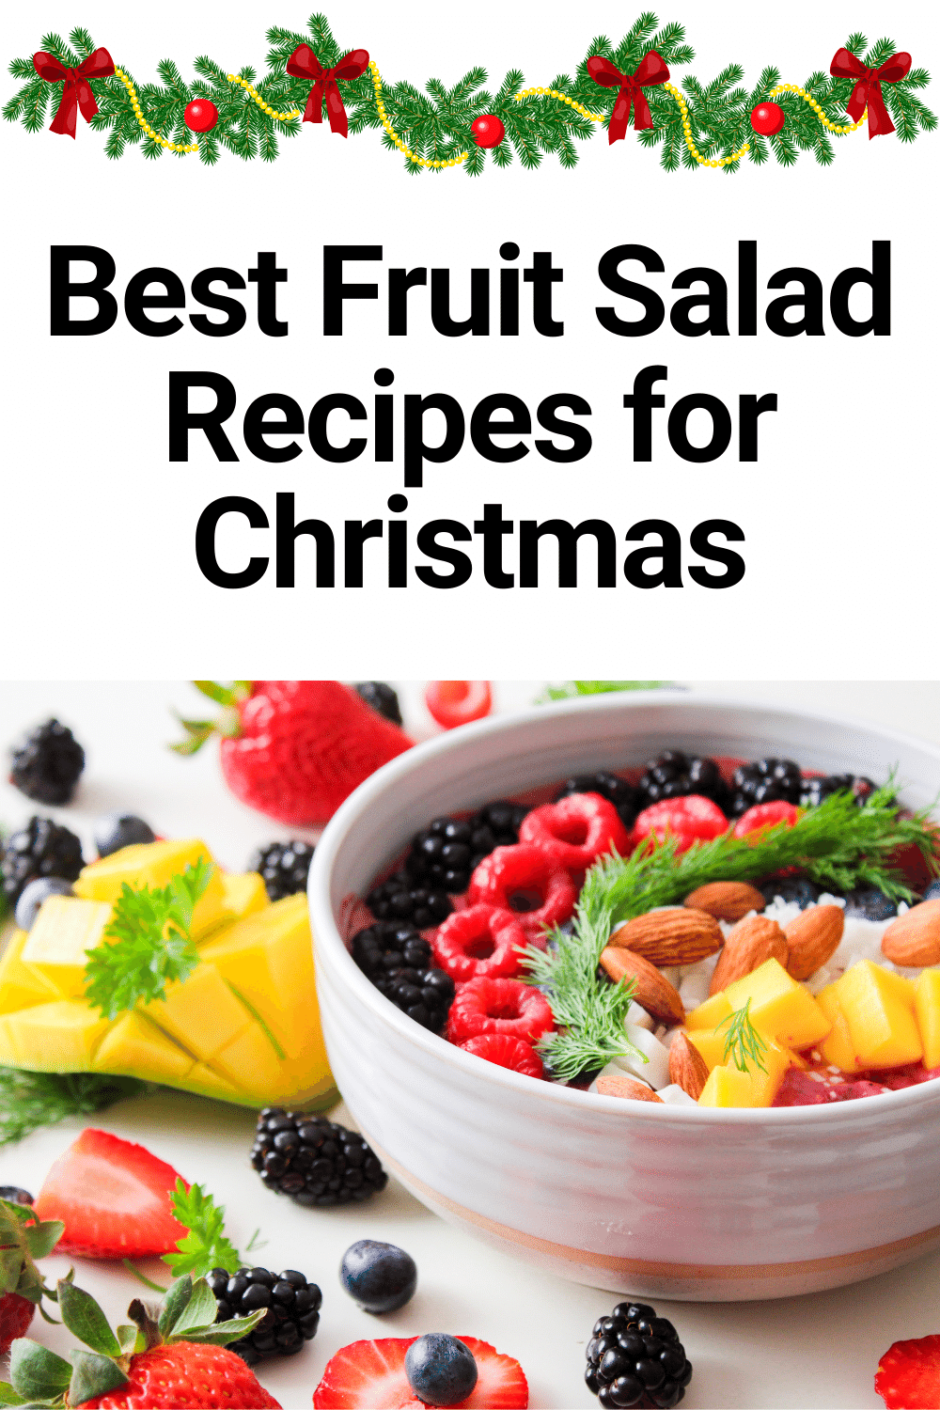 Best Fruit Salad Recipes for Christmas